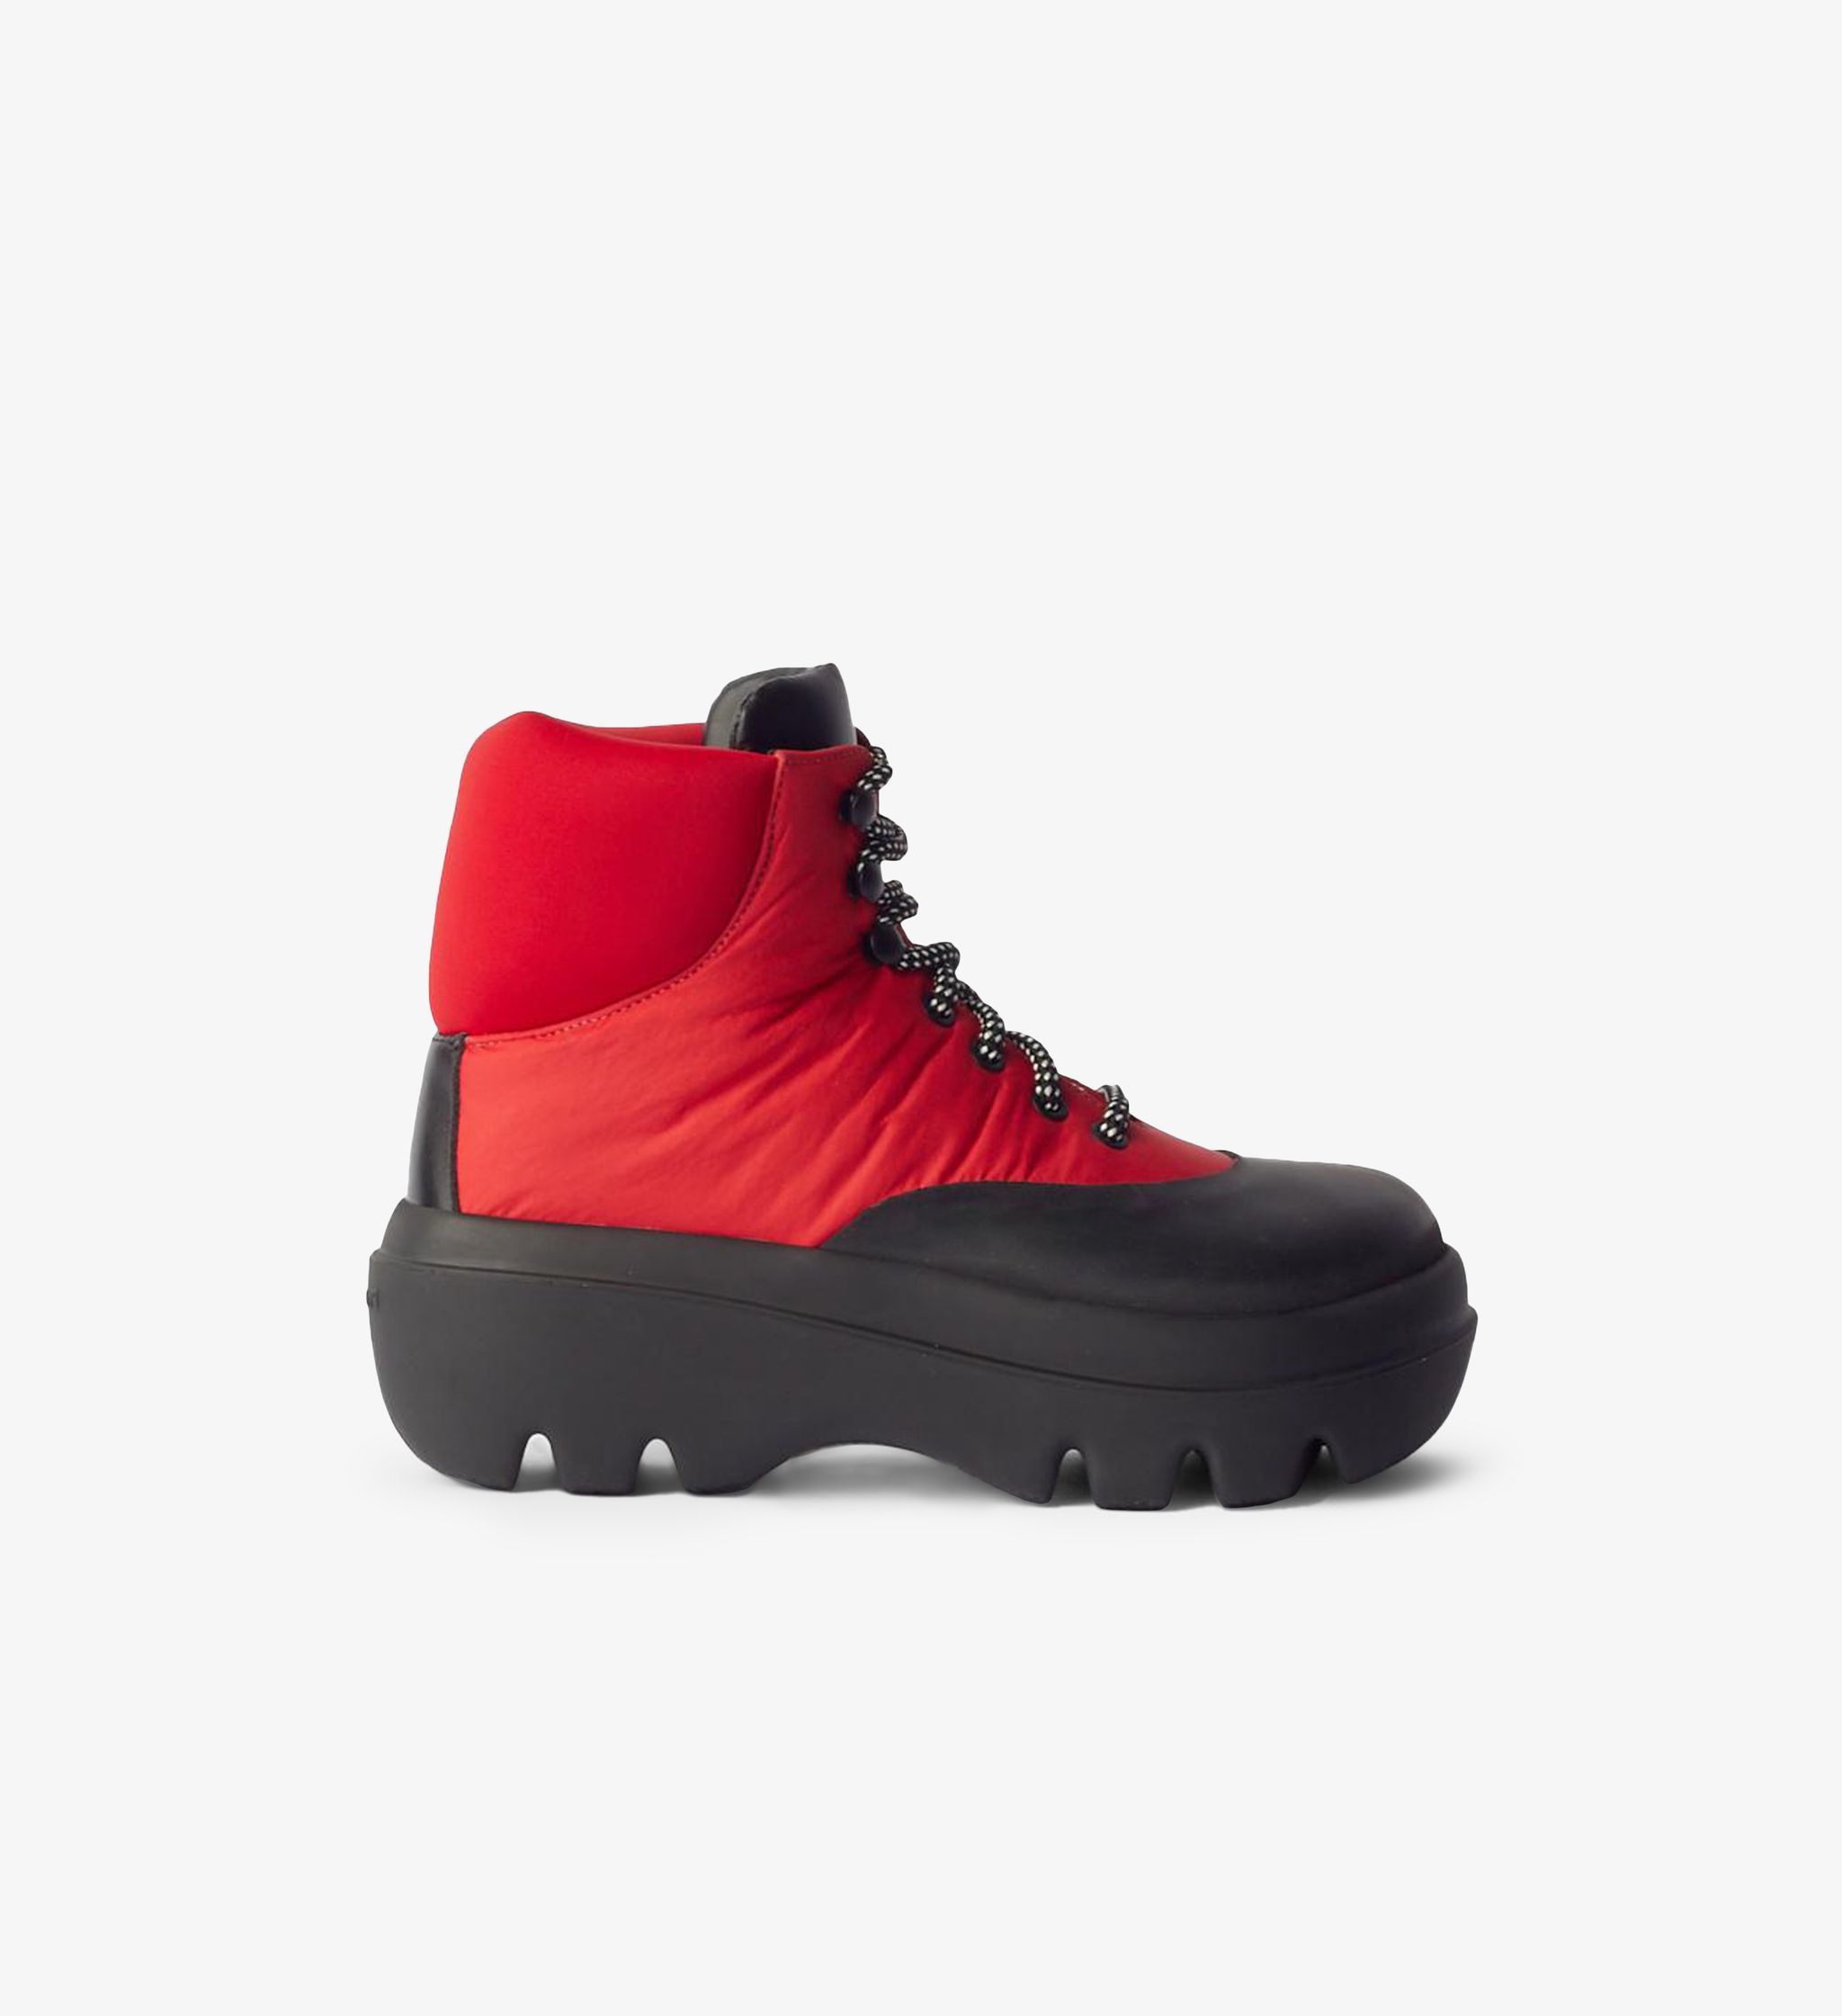 Storm Hiking Boots - 1